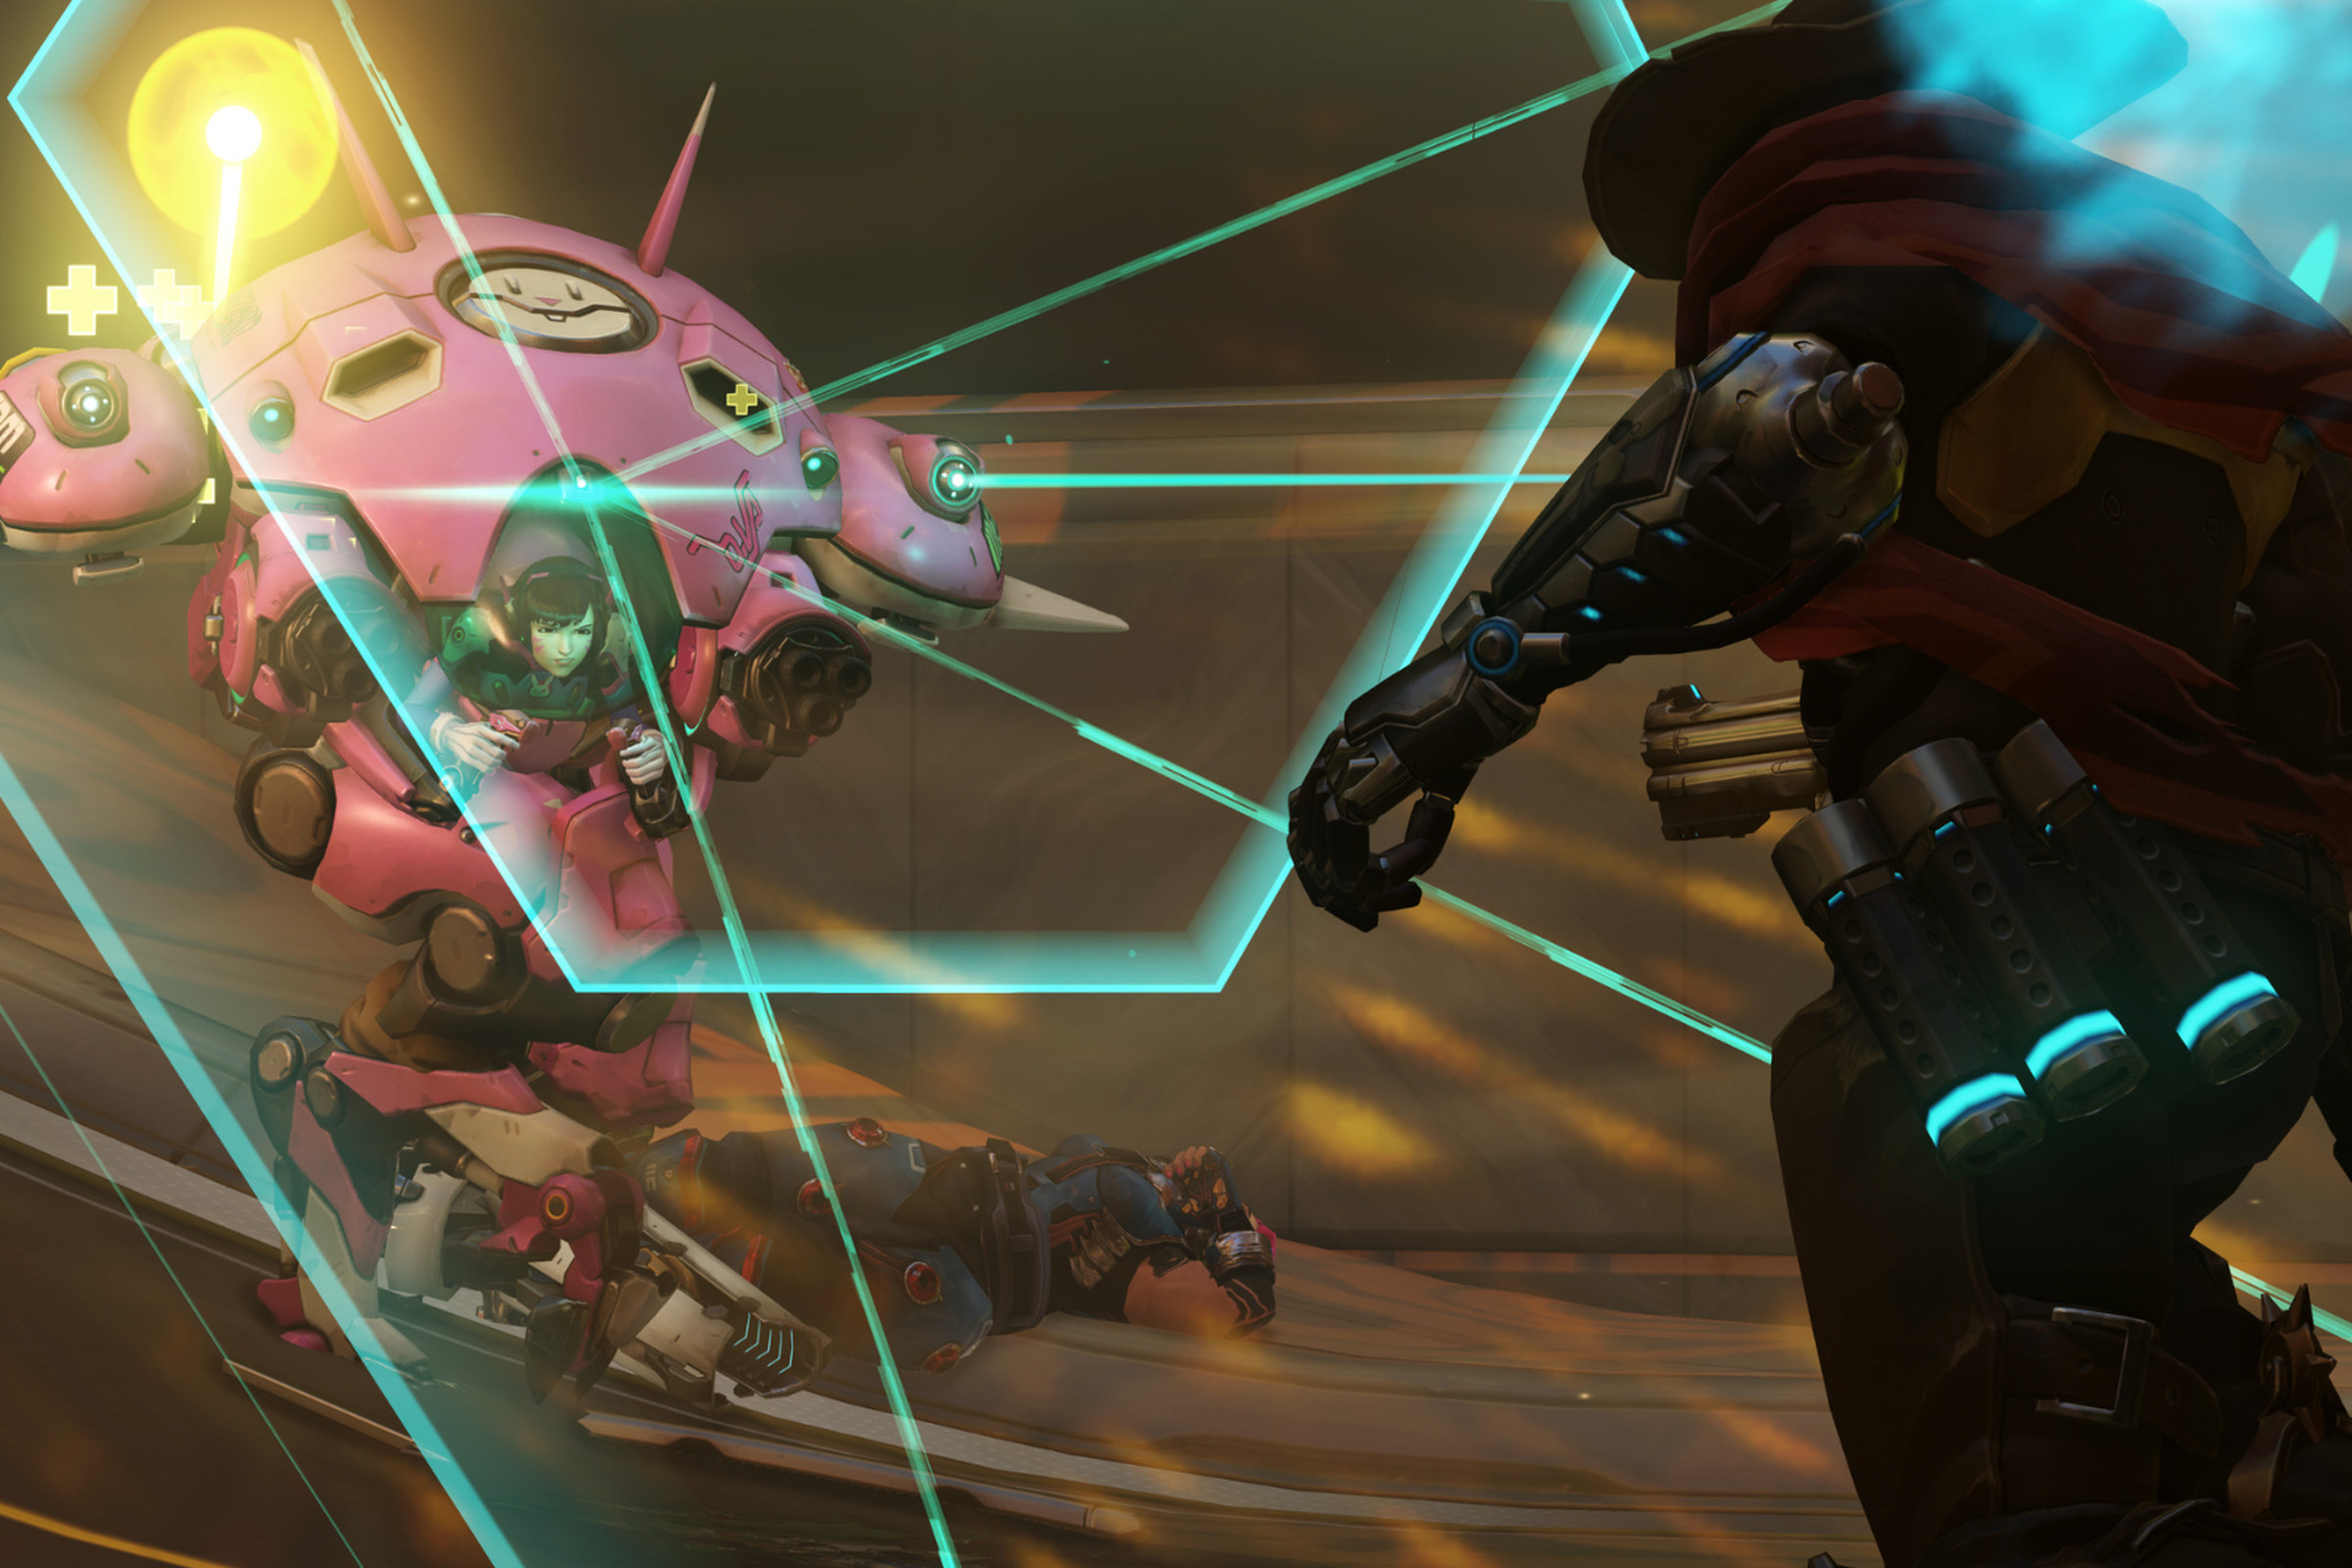 Screenshot from Overwatch featuring the hero D.Va in her pink bulbous mecha engaging her Defense Matrix represented as teal blue triangular shaped lasers that deflect bullets from the cowboy hero Cassidy.